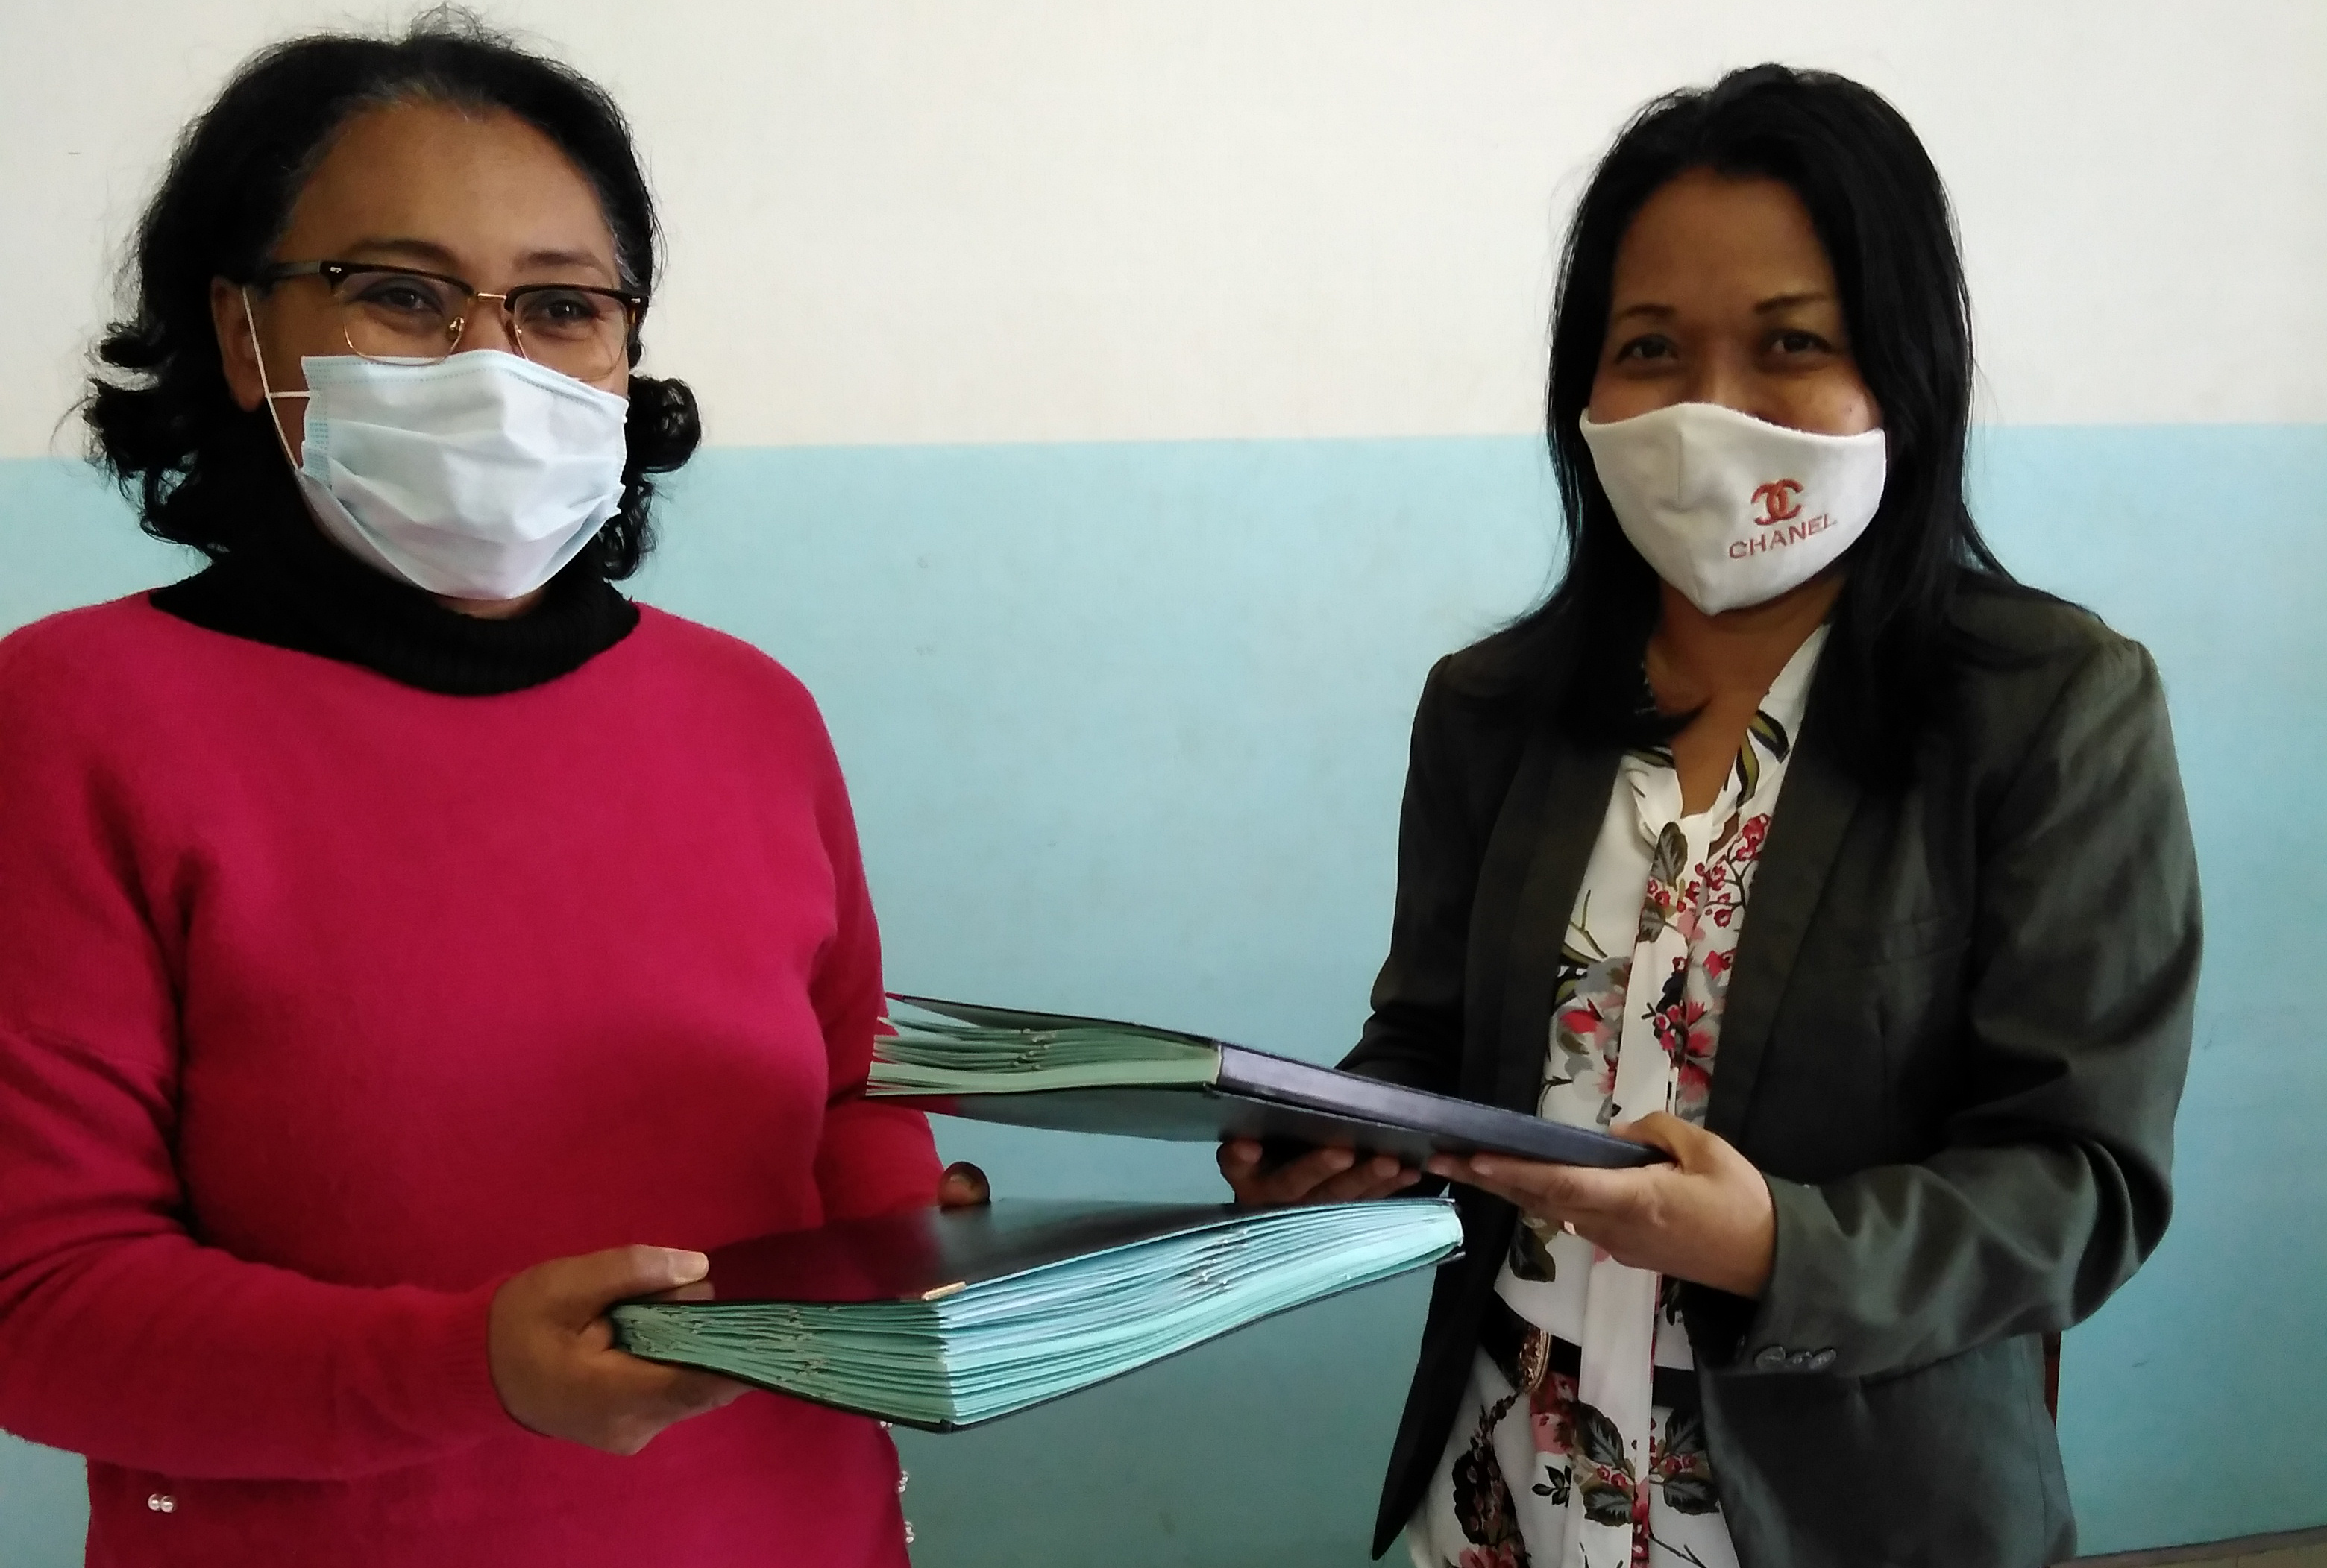 Two women from Madagascar pose in front of a table at a signing ceremony with the School of Medicine, University of Antananarivo.